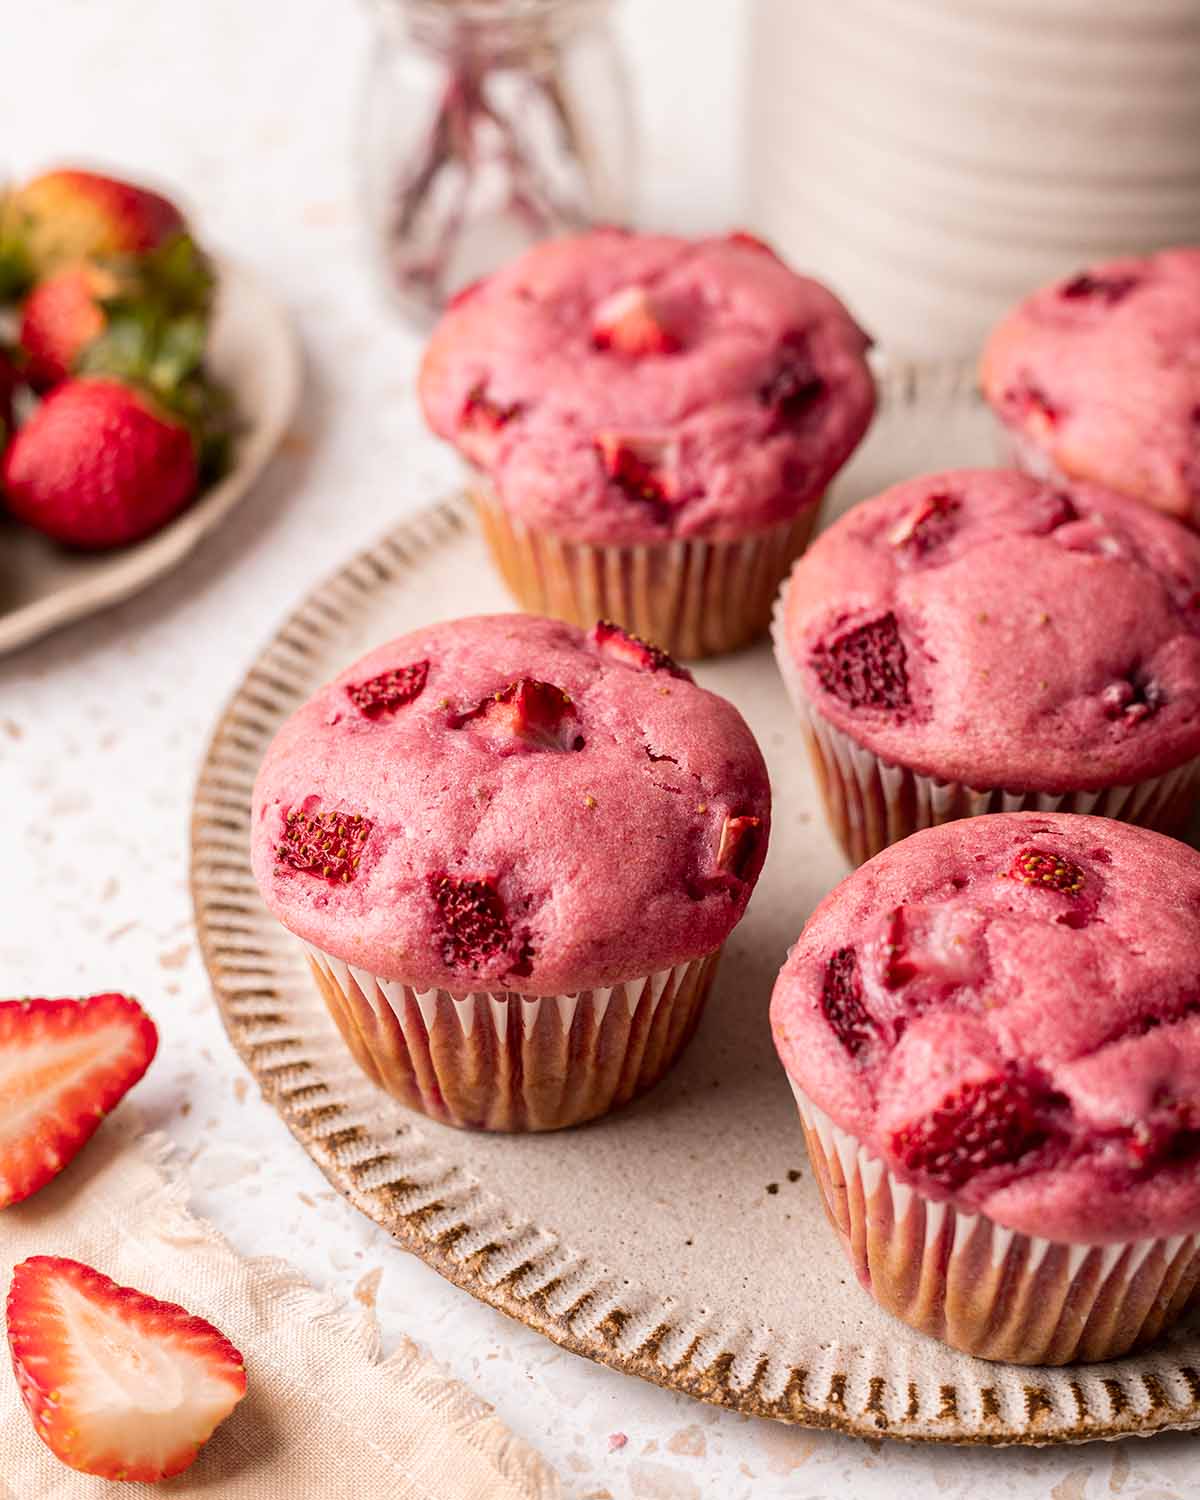 Plate of pink-colored strawberry muffins.